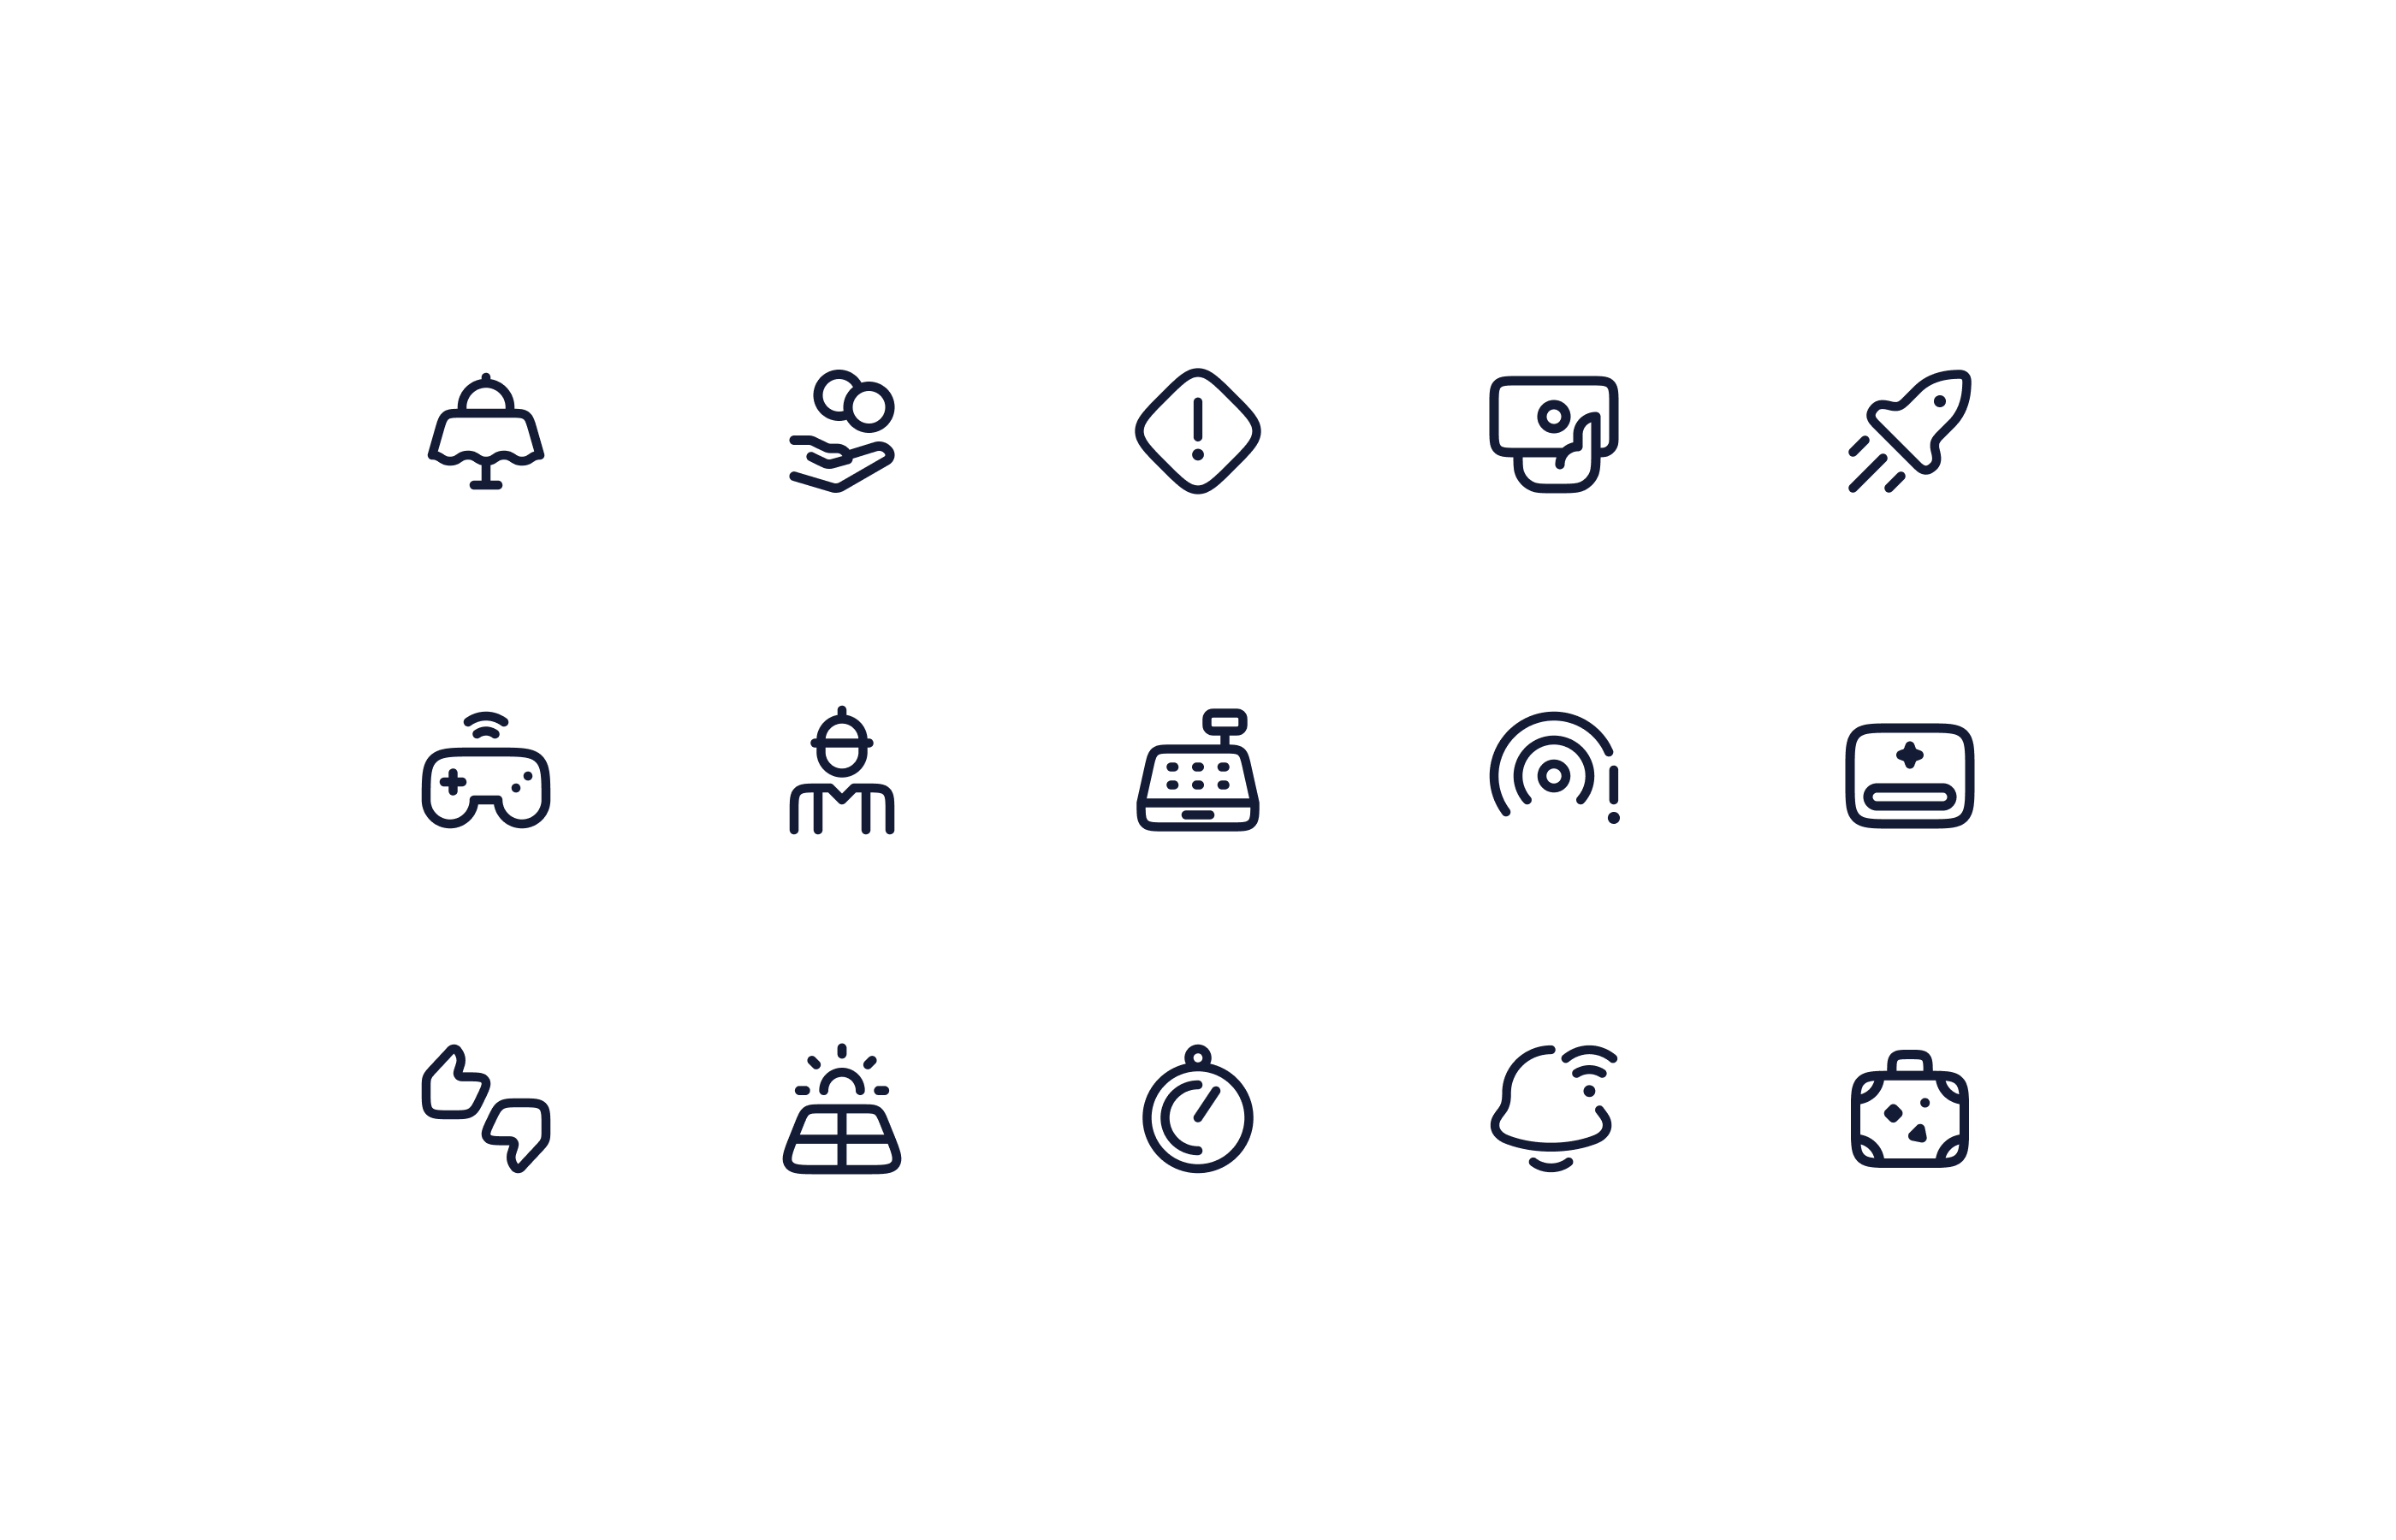 New icons from hugeicons